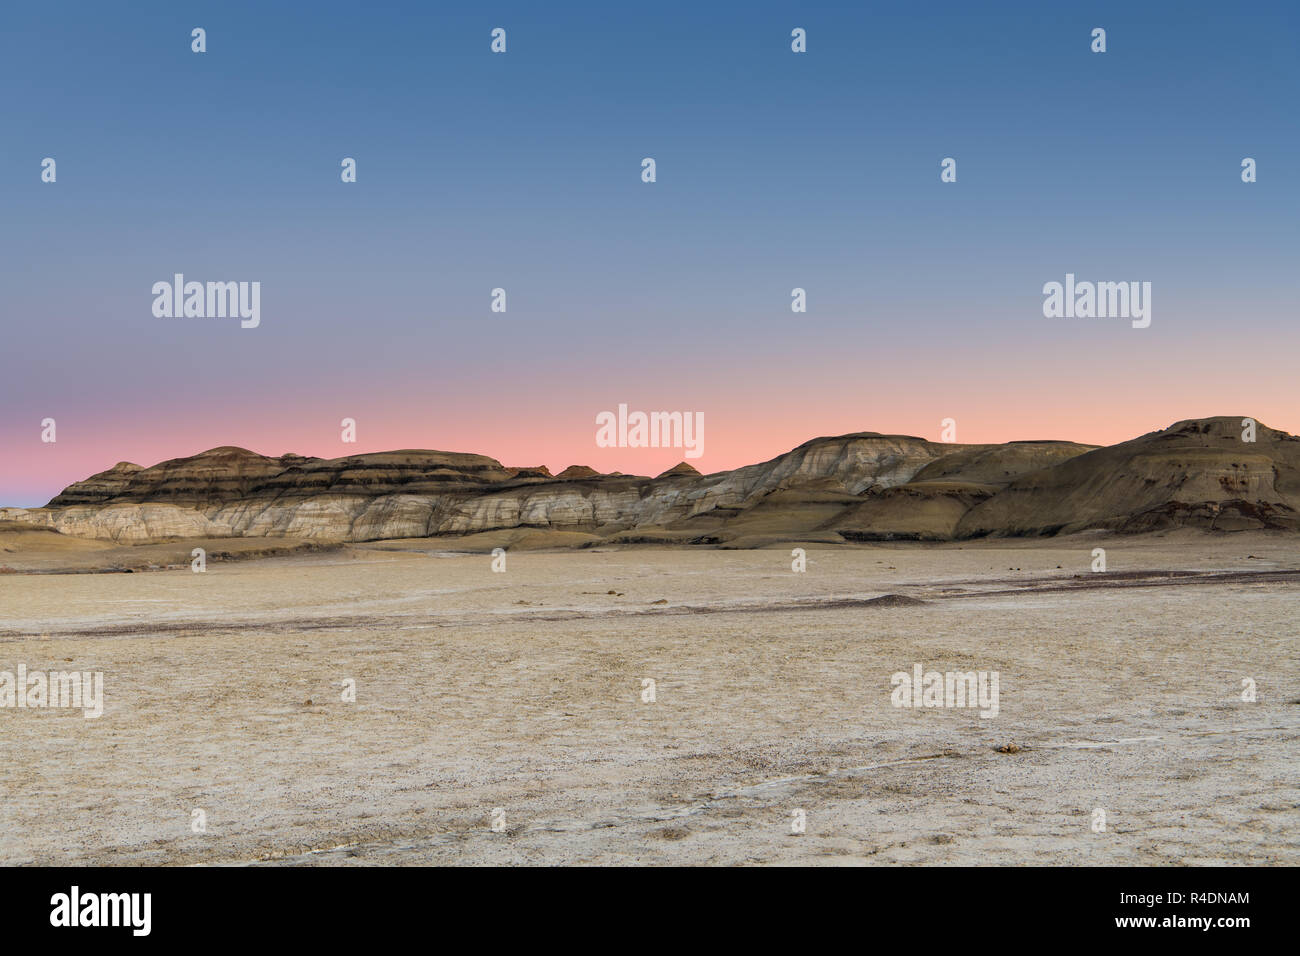 The desert landscape and hills of the Bisti Badlands of New Mexico at sunset under a beautiful sky with pink, peach, purple, and blue hues Stock Photo